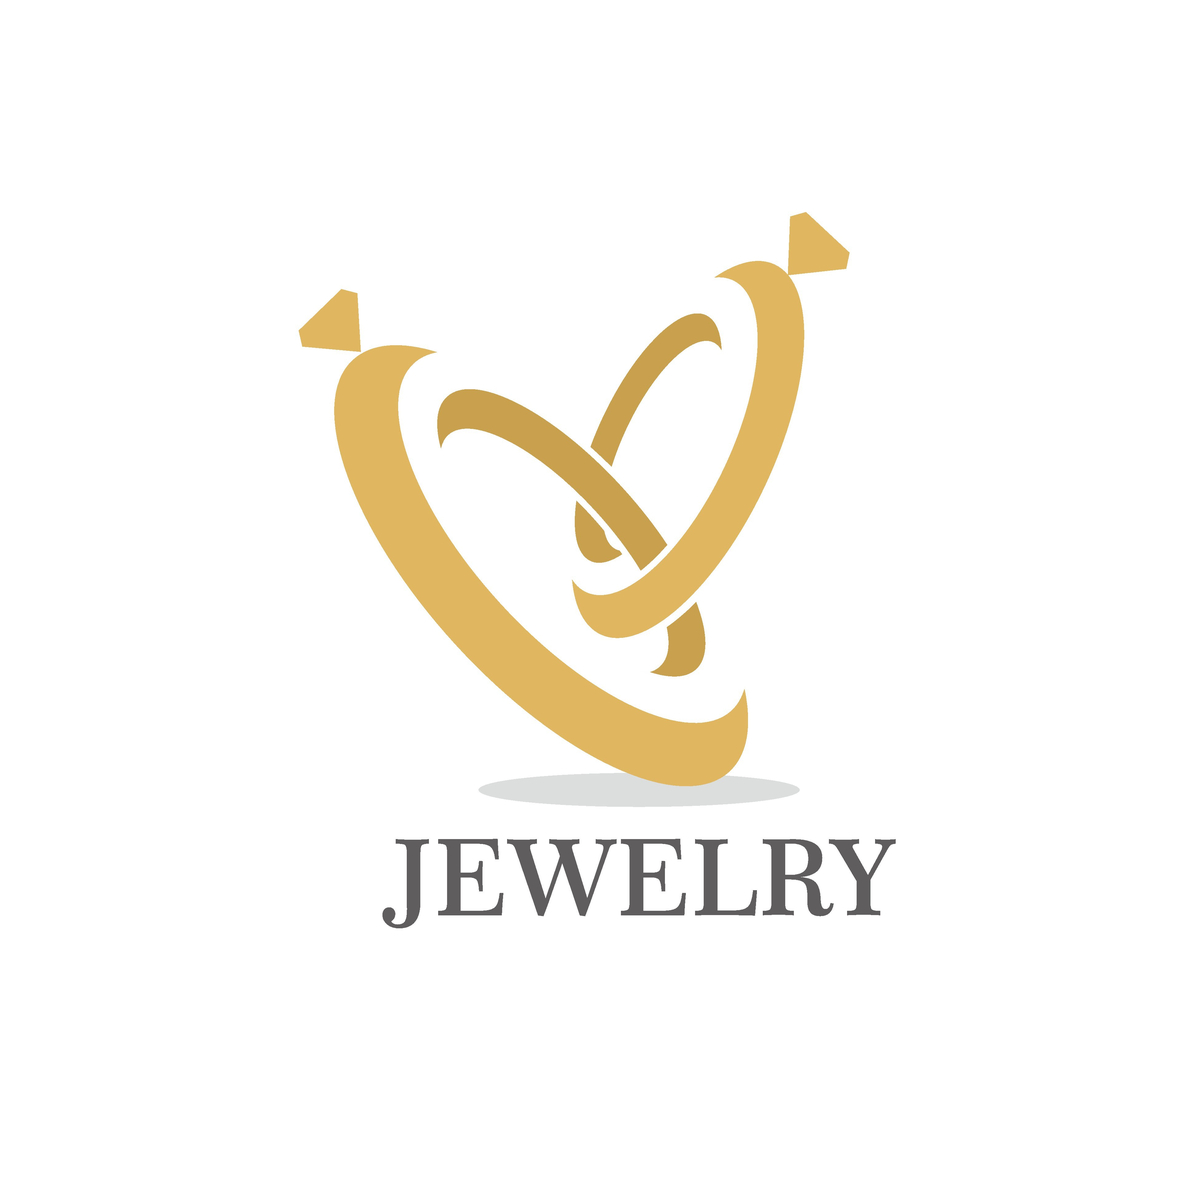 Best Jewellery Logo Design Ideas for Your Need